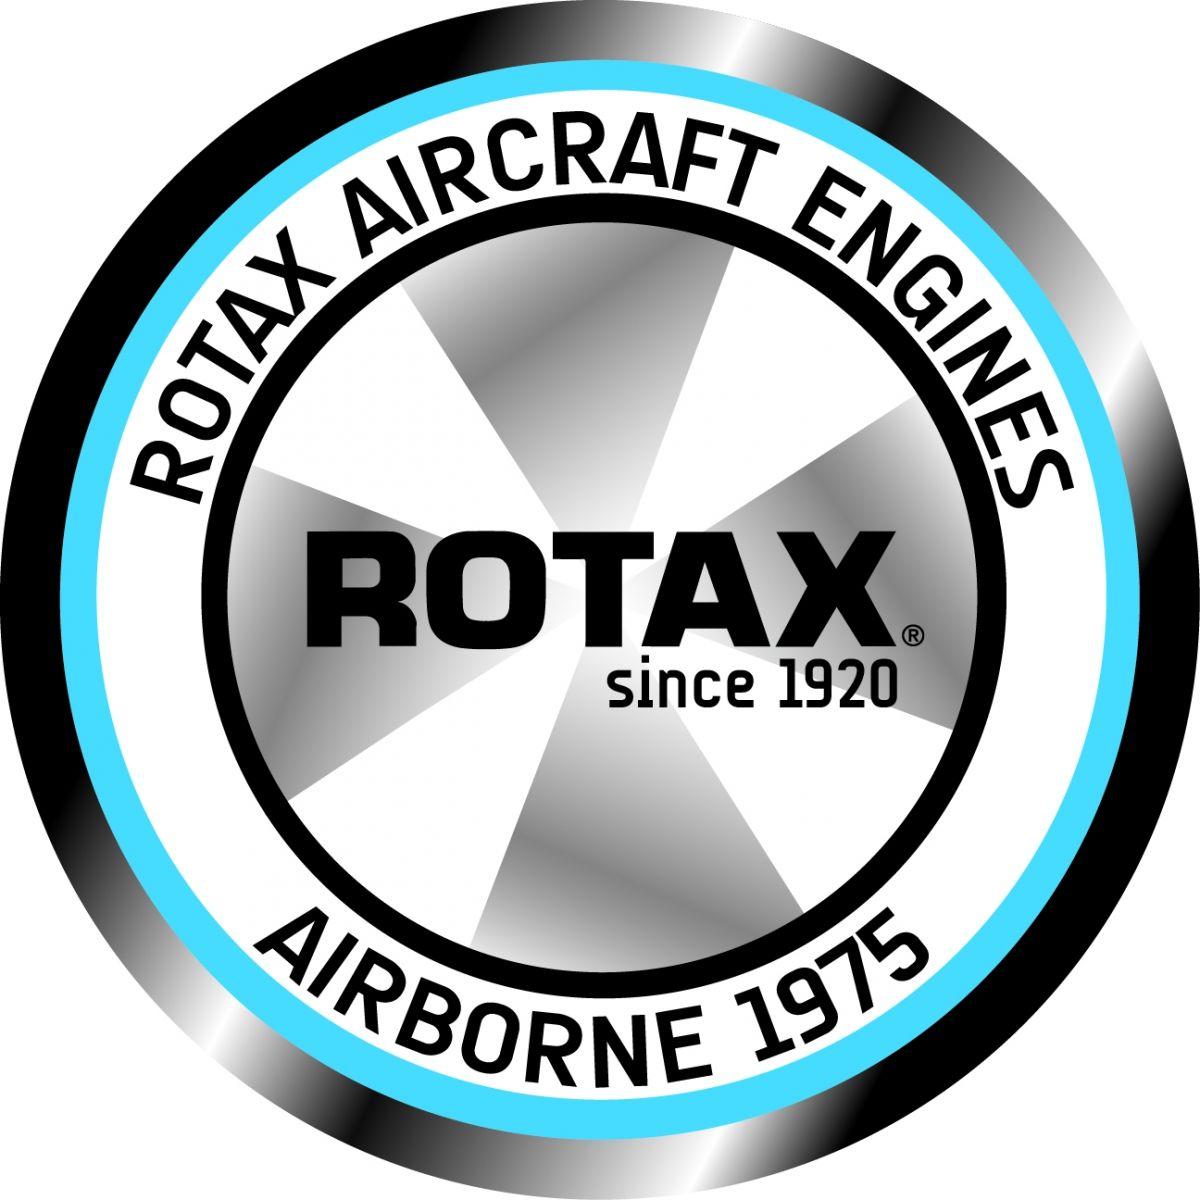 Aircraft Engine Logo - 40 YEARS OF ROTAX AIRCRAFT ENGINES - BRP-Rotax